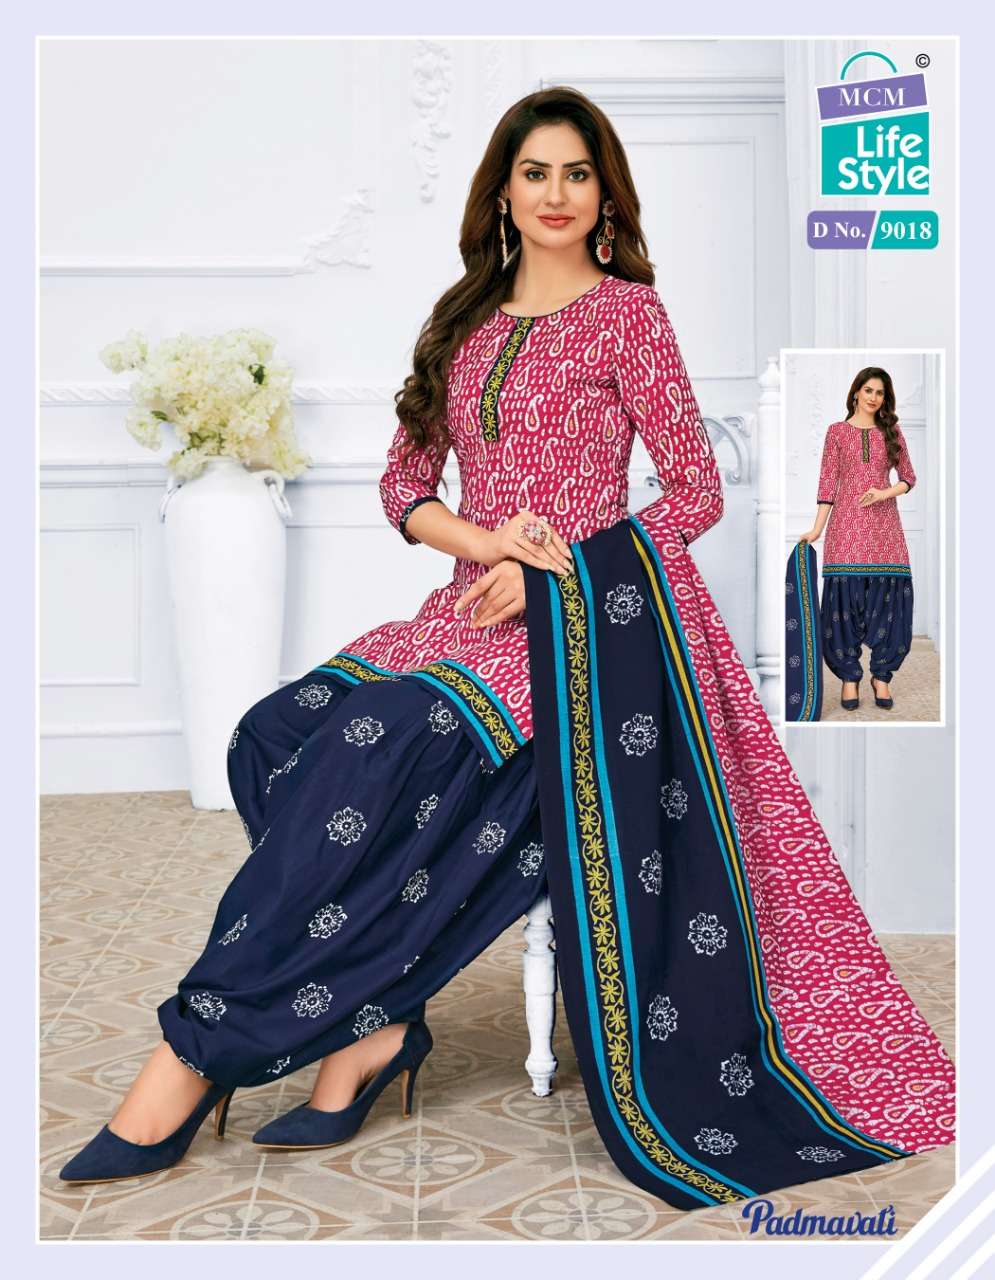 Padmawati Vol 02 By Mcm Lifestyle Printed Cotton Dress Materials Cotton Lowest Price Cheapest Salwar Suit Catalog Wholesale Price